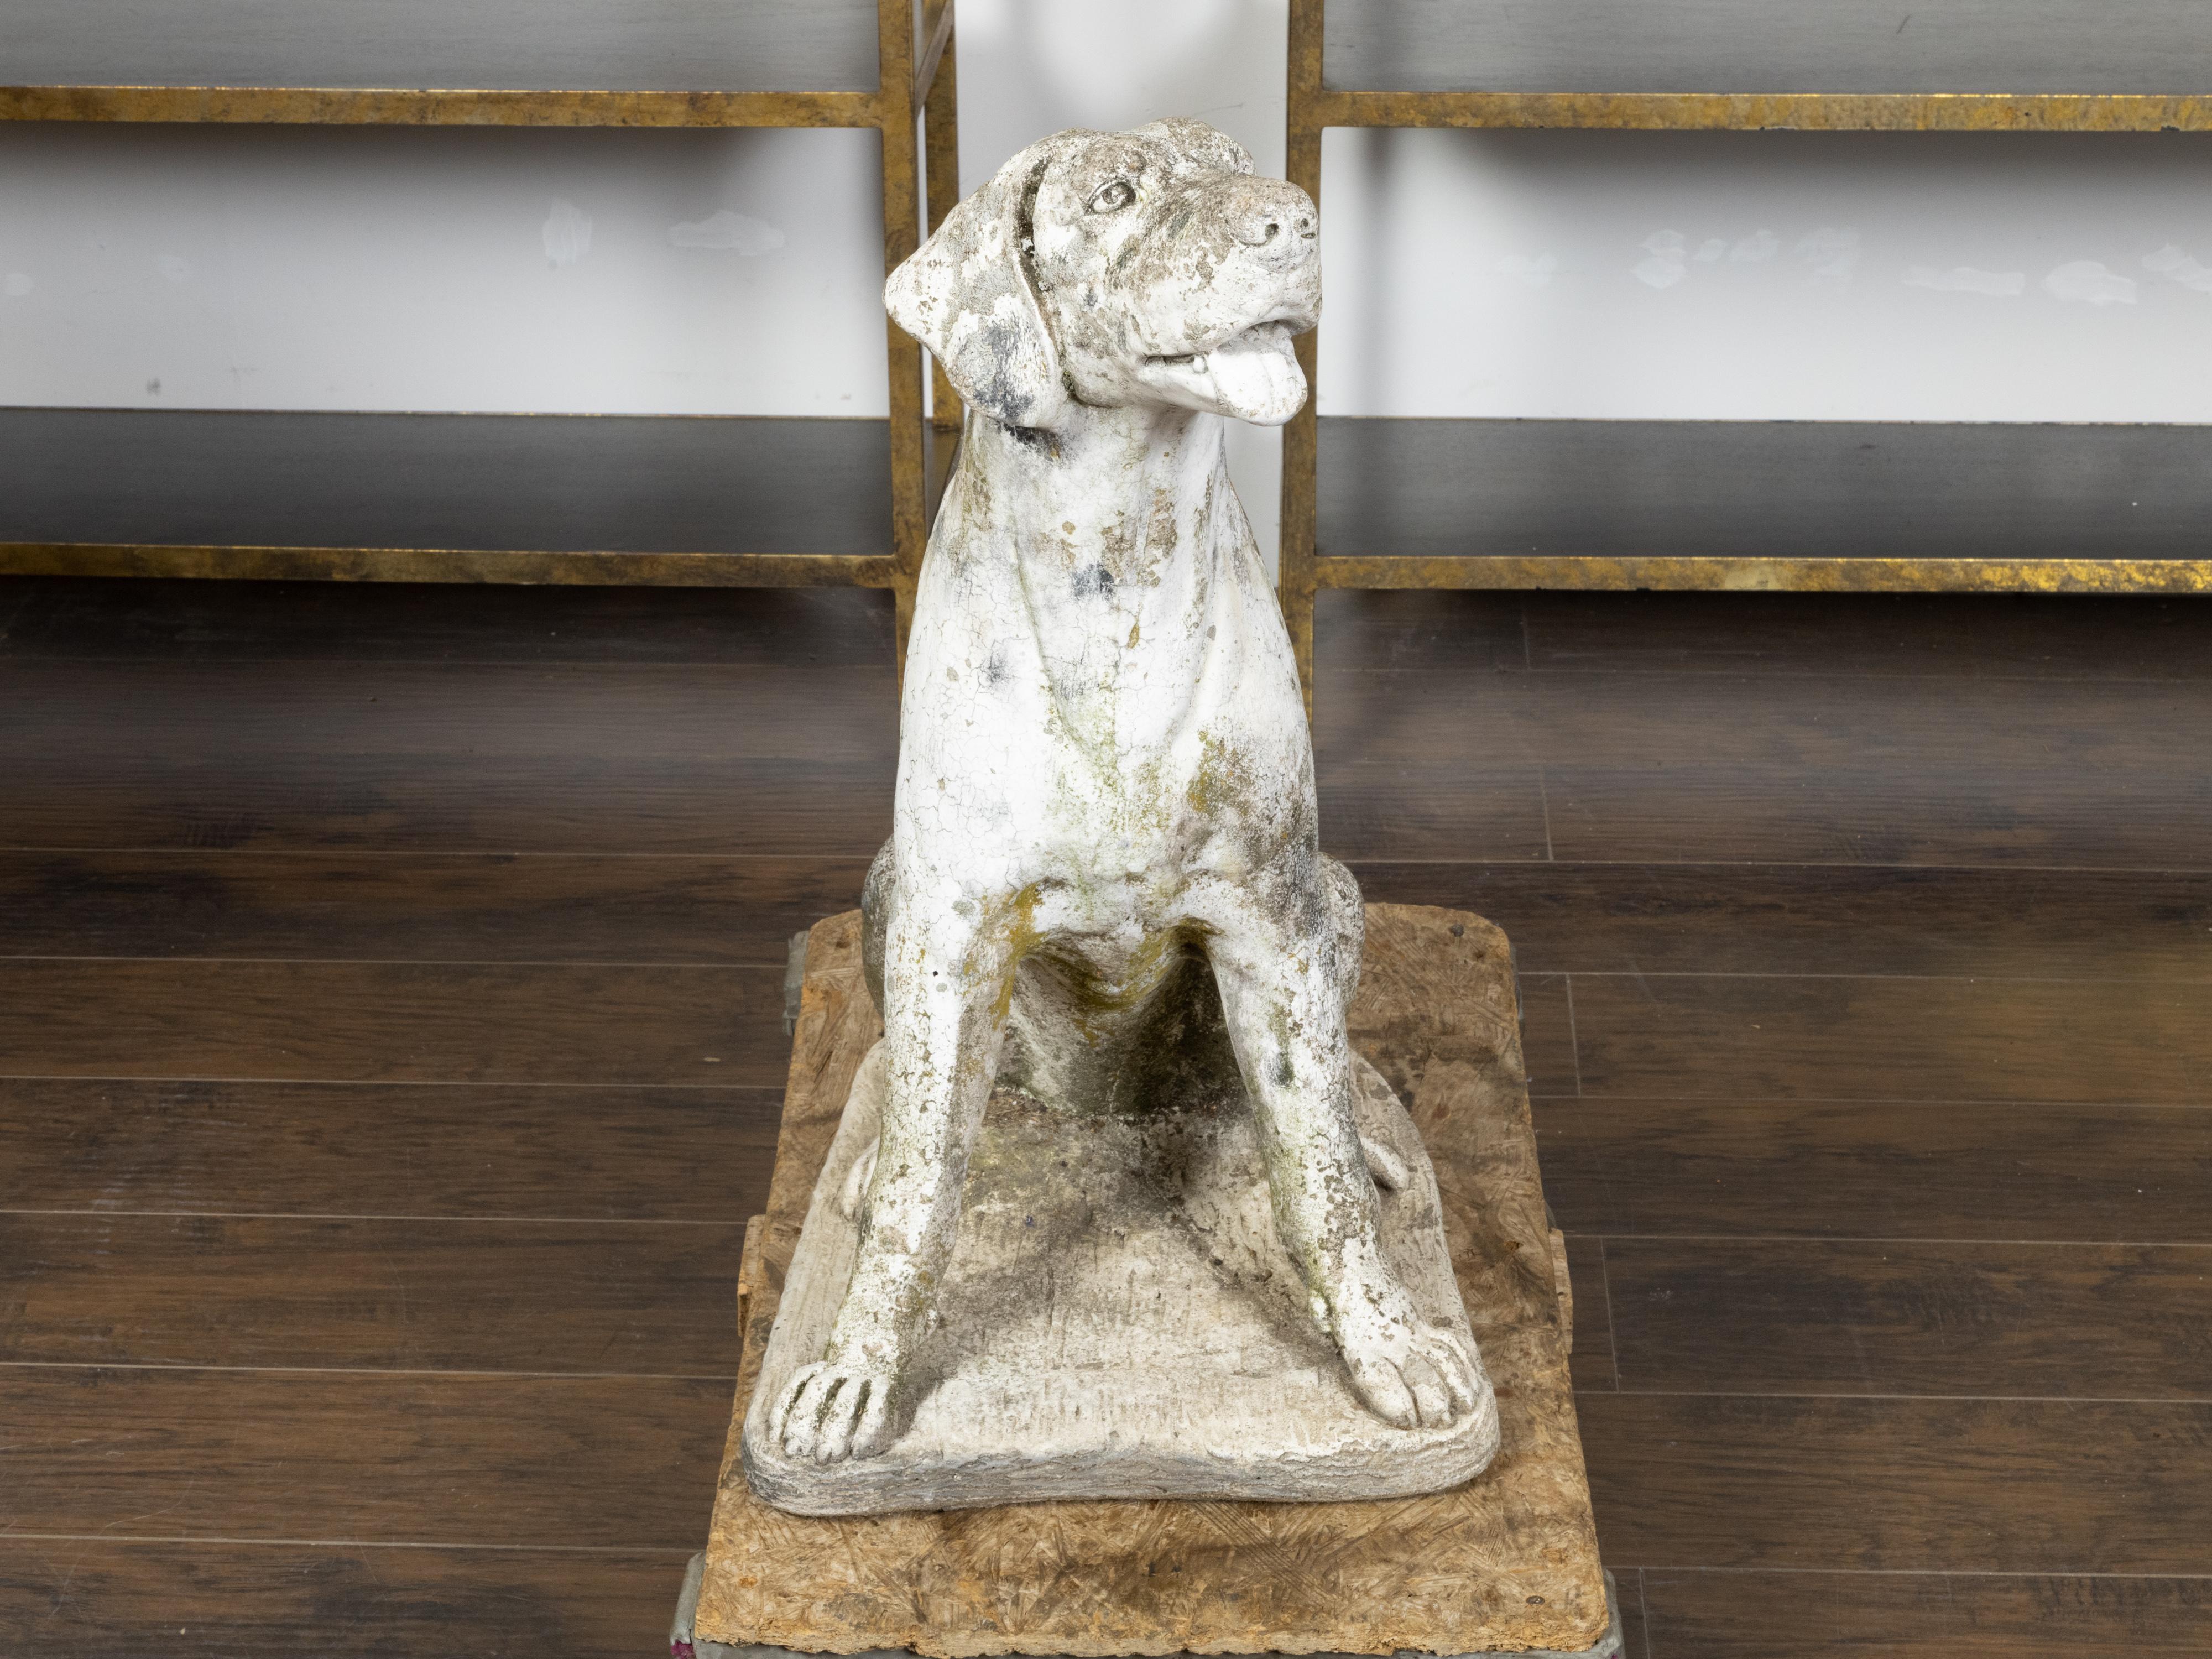 English 1920s Carved Stone Sculpture of a Dog Obediently Sitting on a Base 1